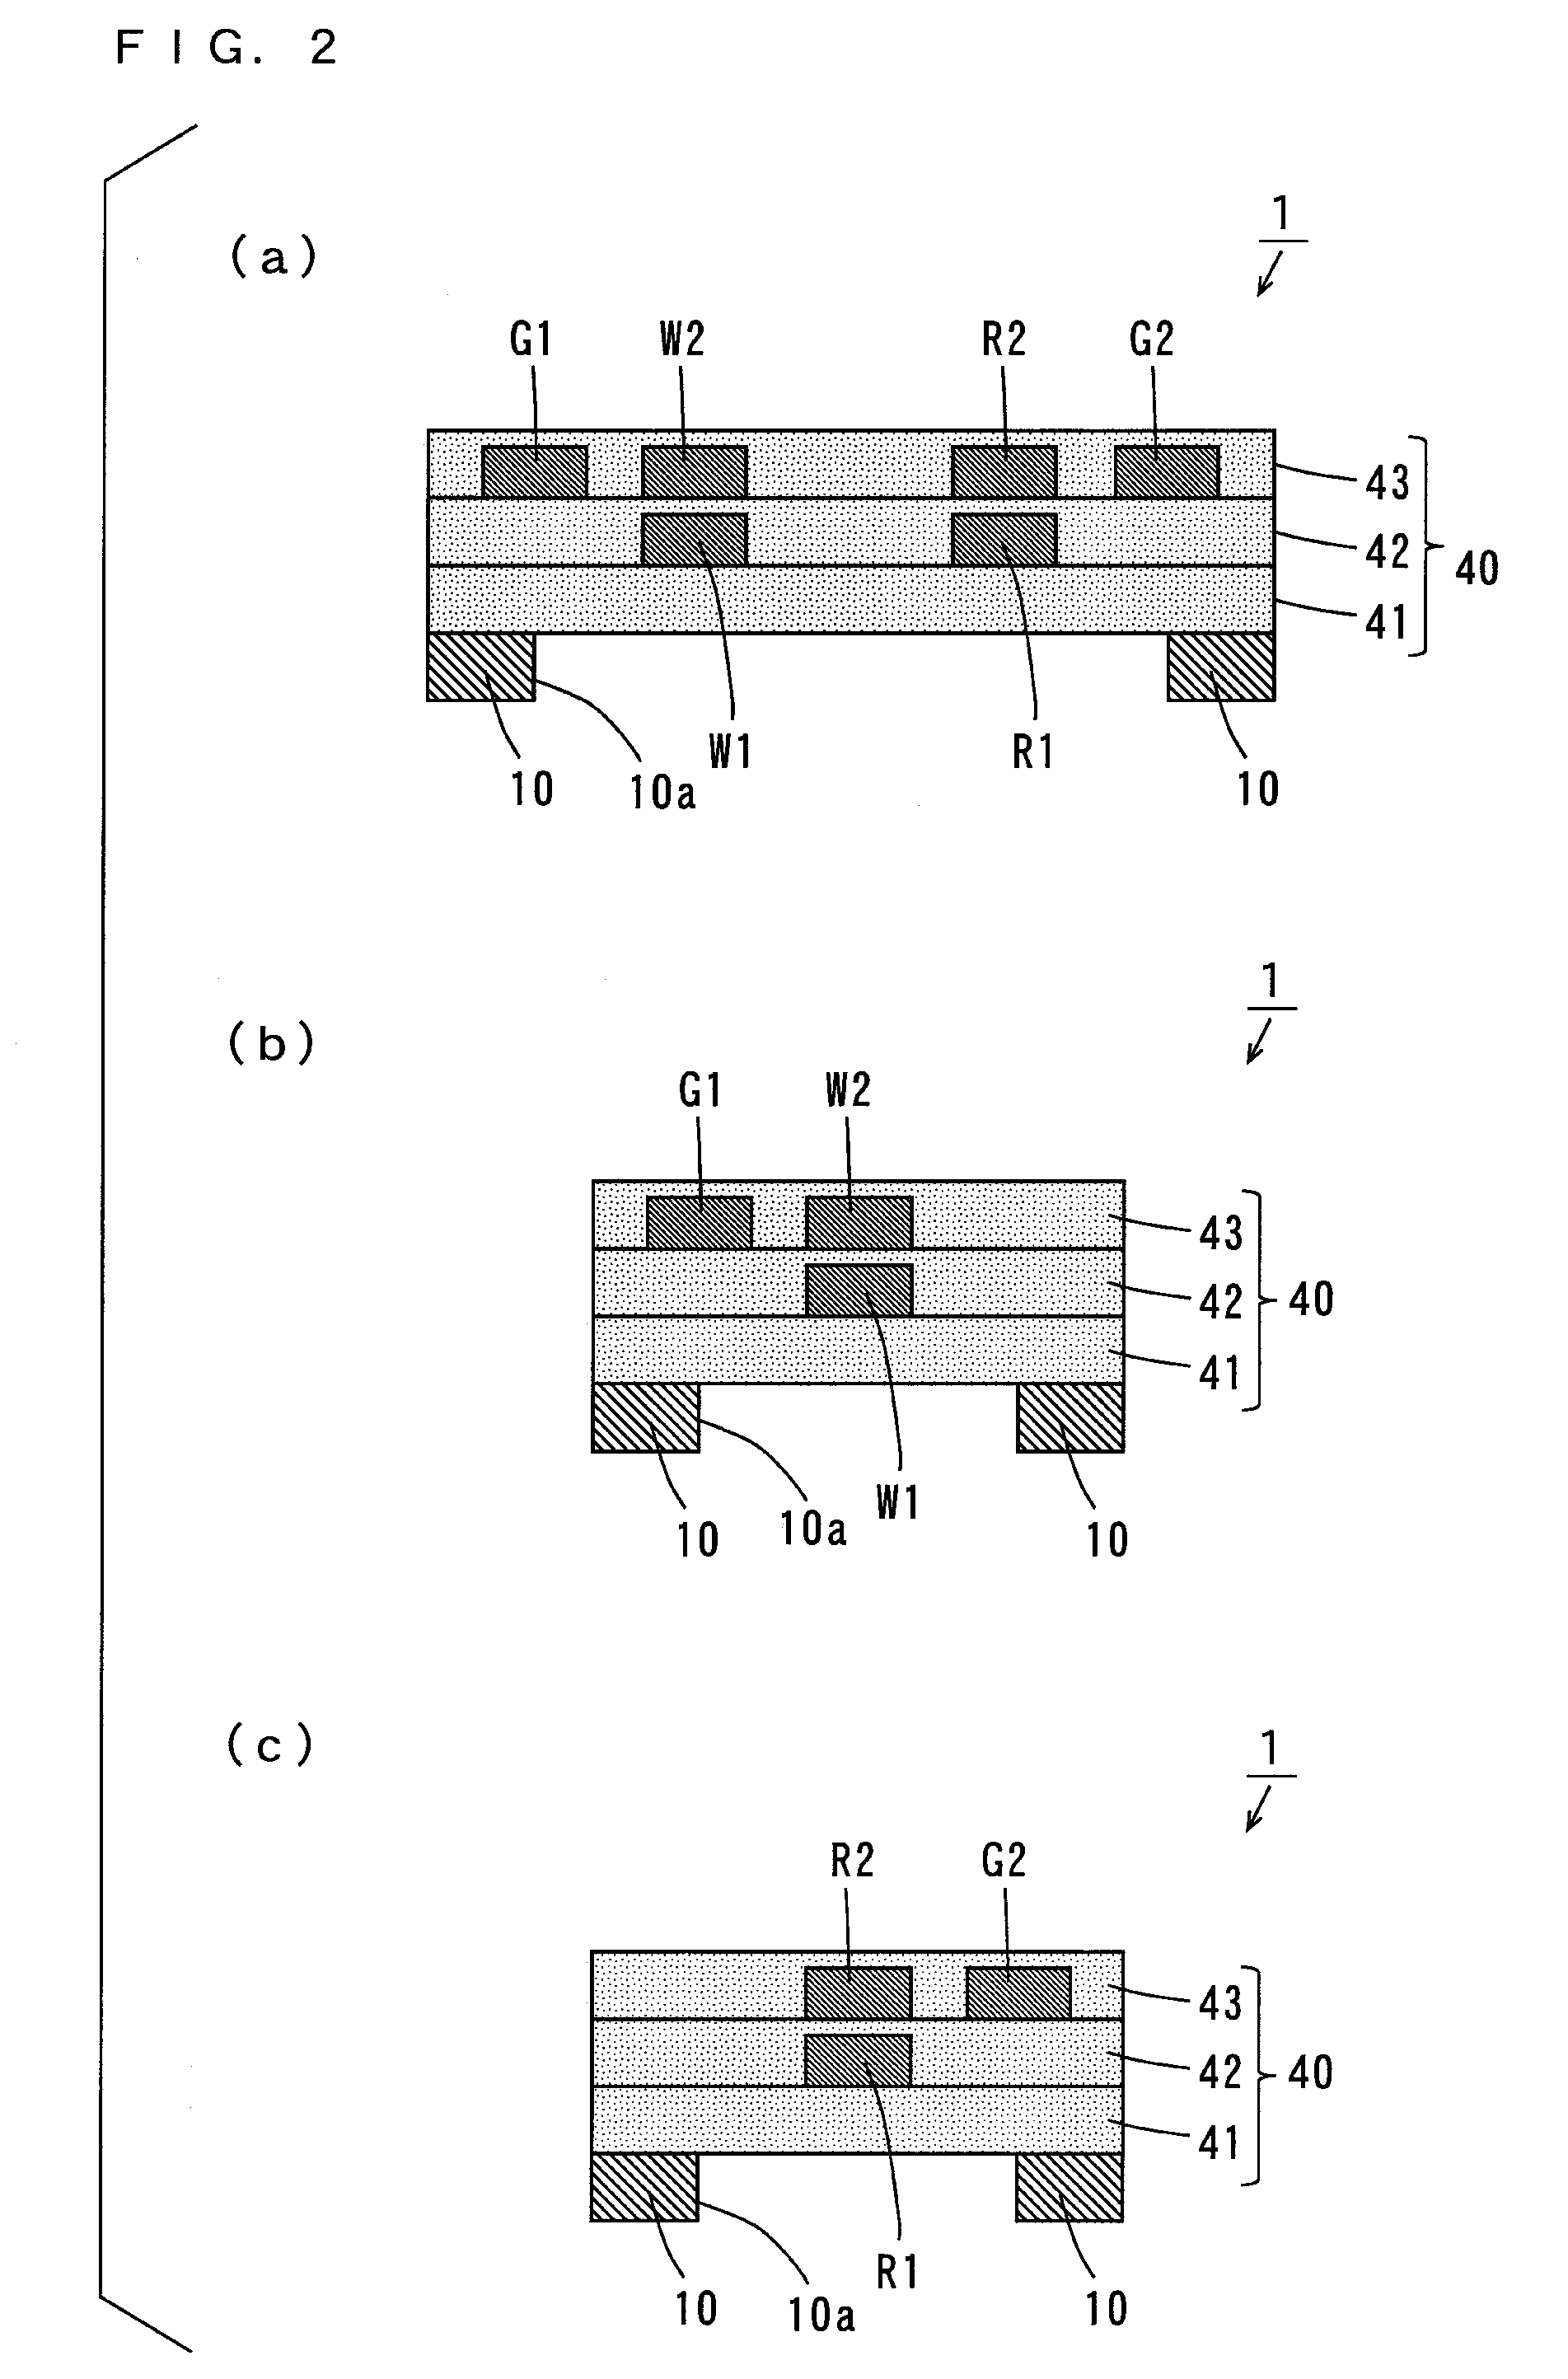 Multi-layered printed circuit board with a conductive substrate and three insulating layers with wiring and ground traces